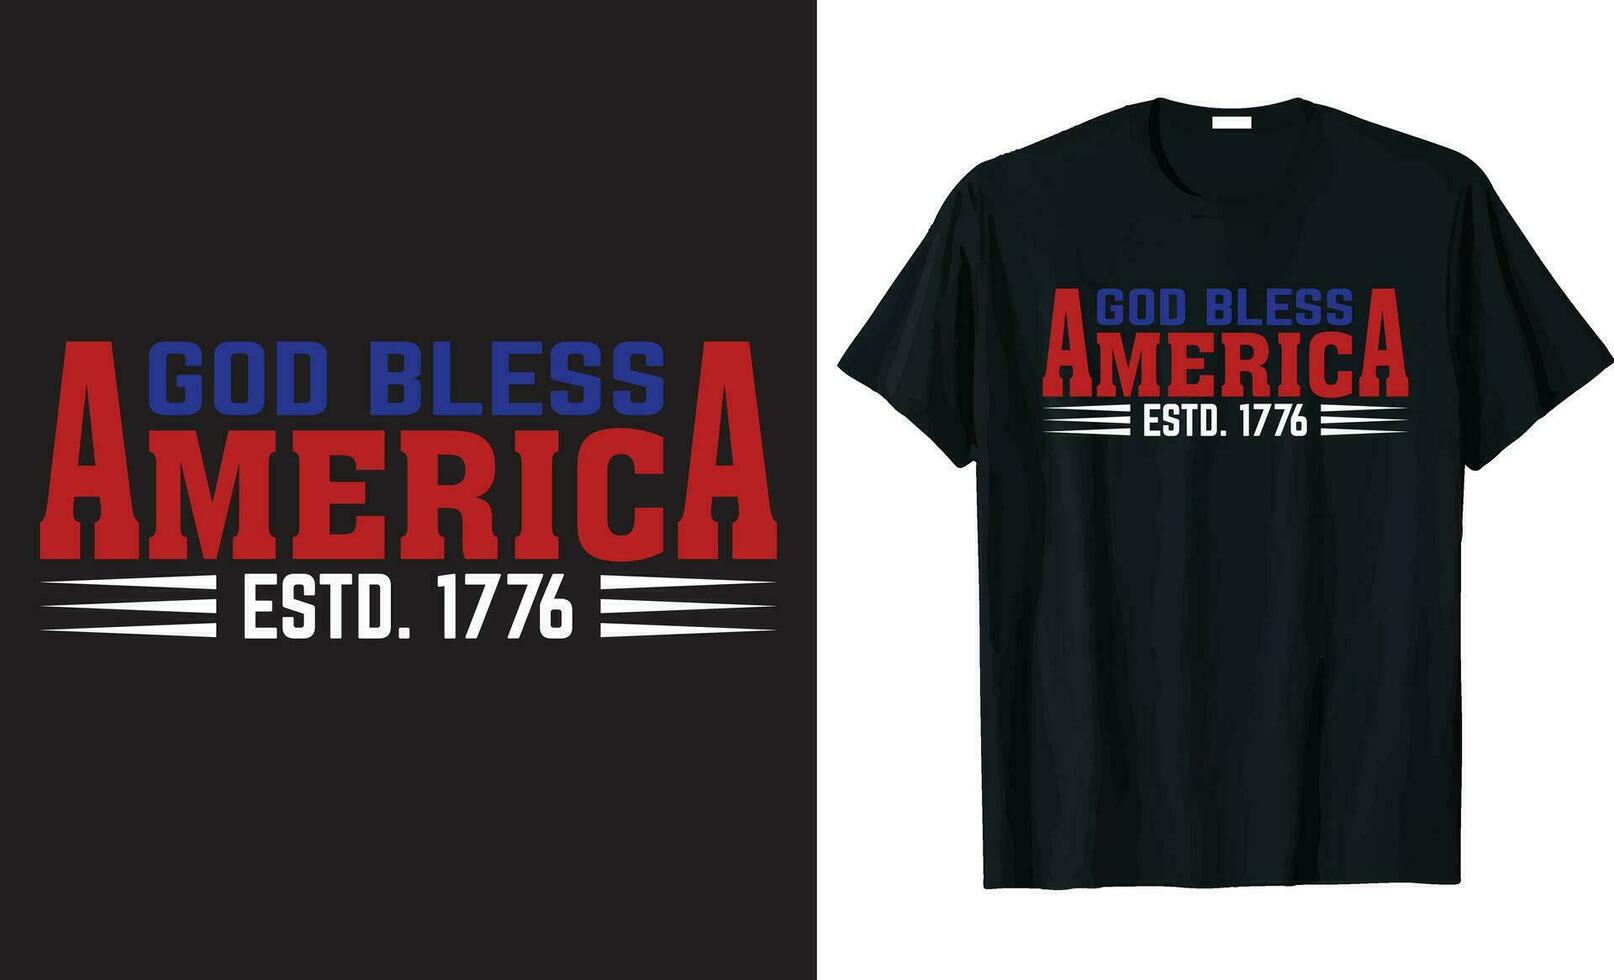 God bless America typography lettering, Illustration with american flag colors. t-shirt design. vector